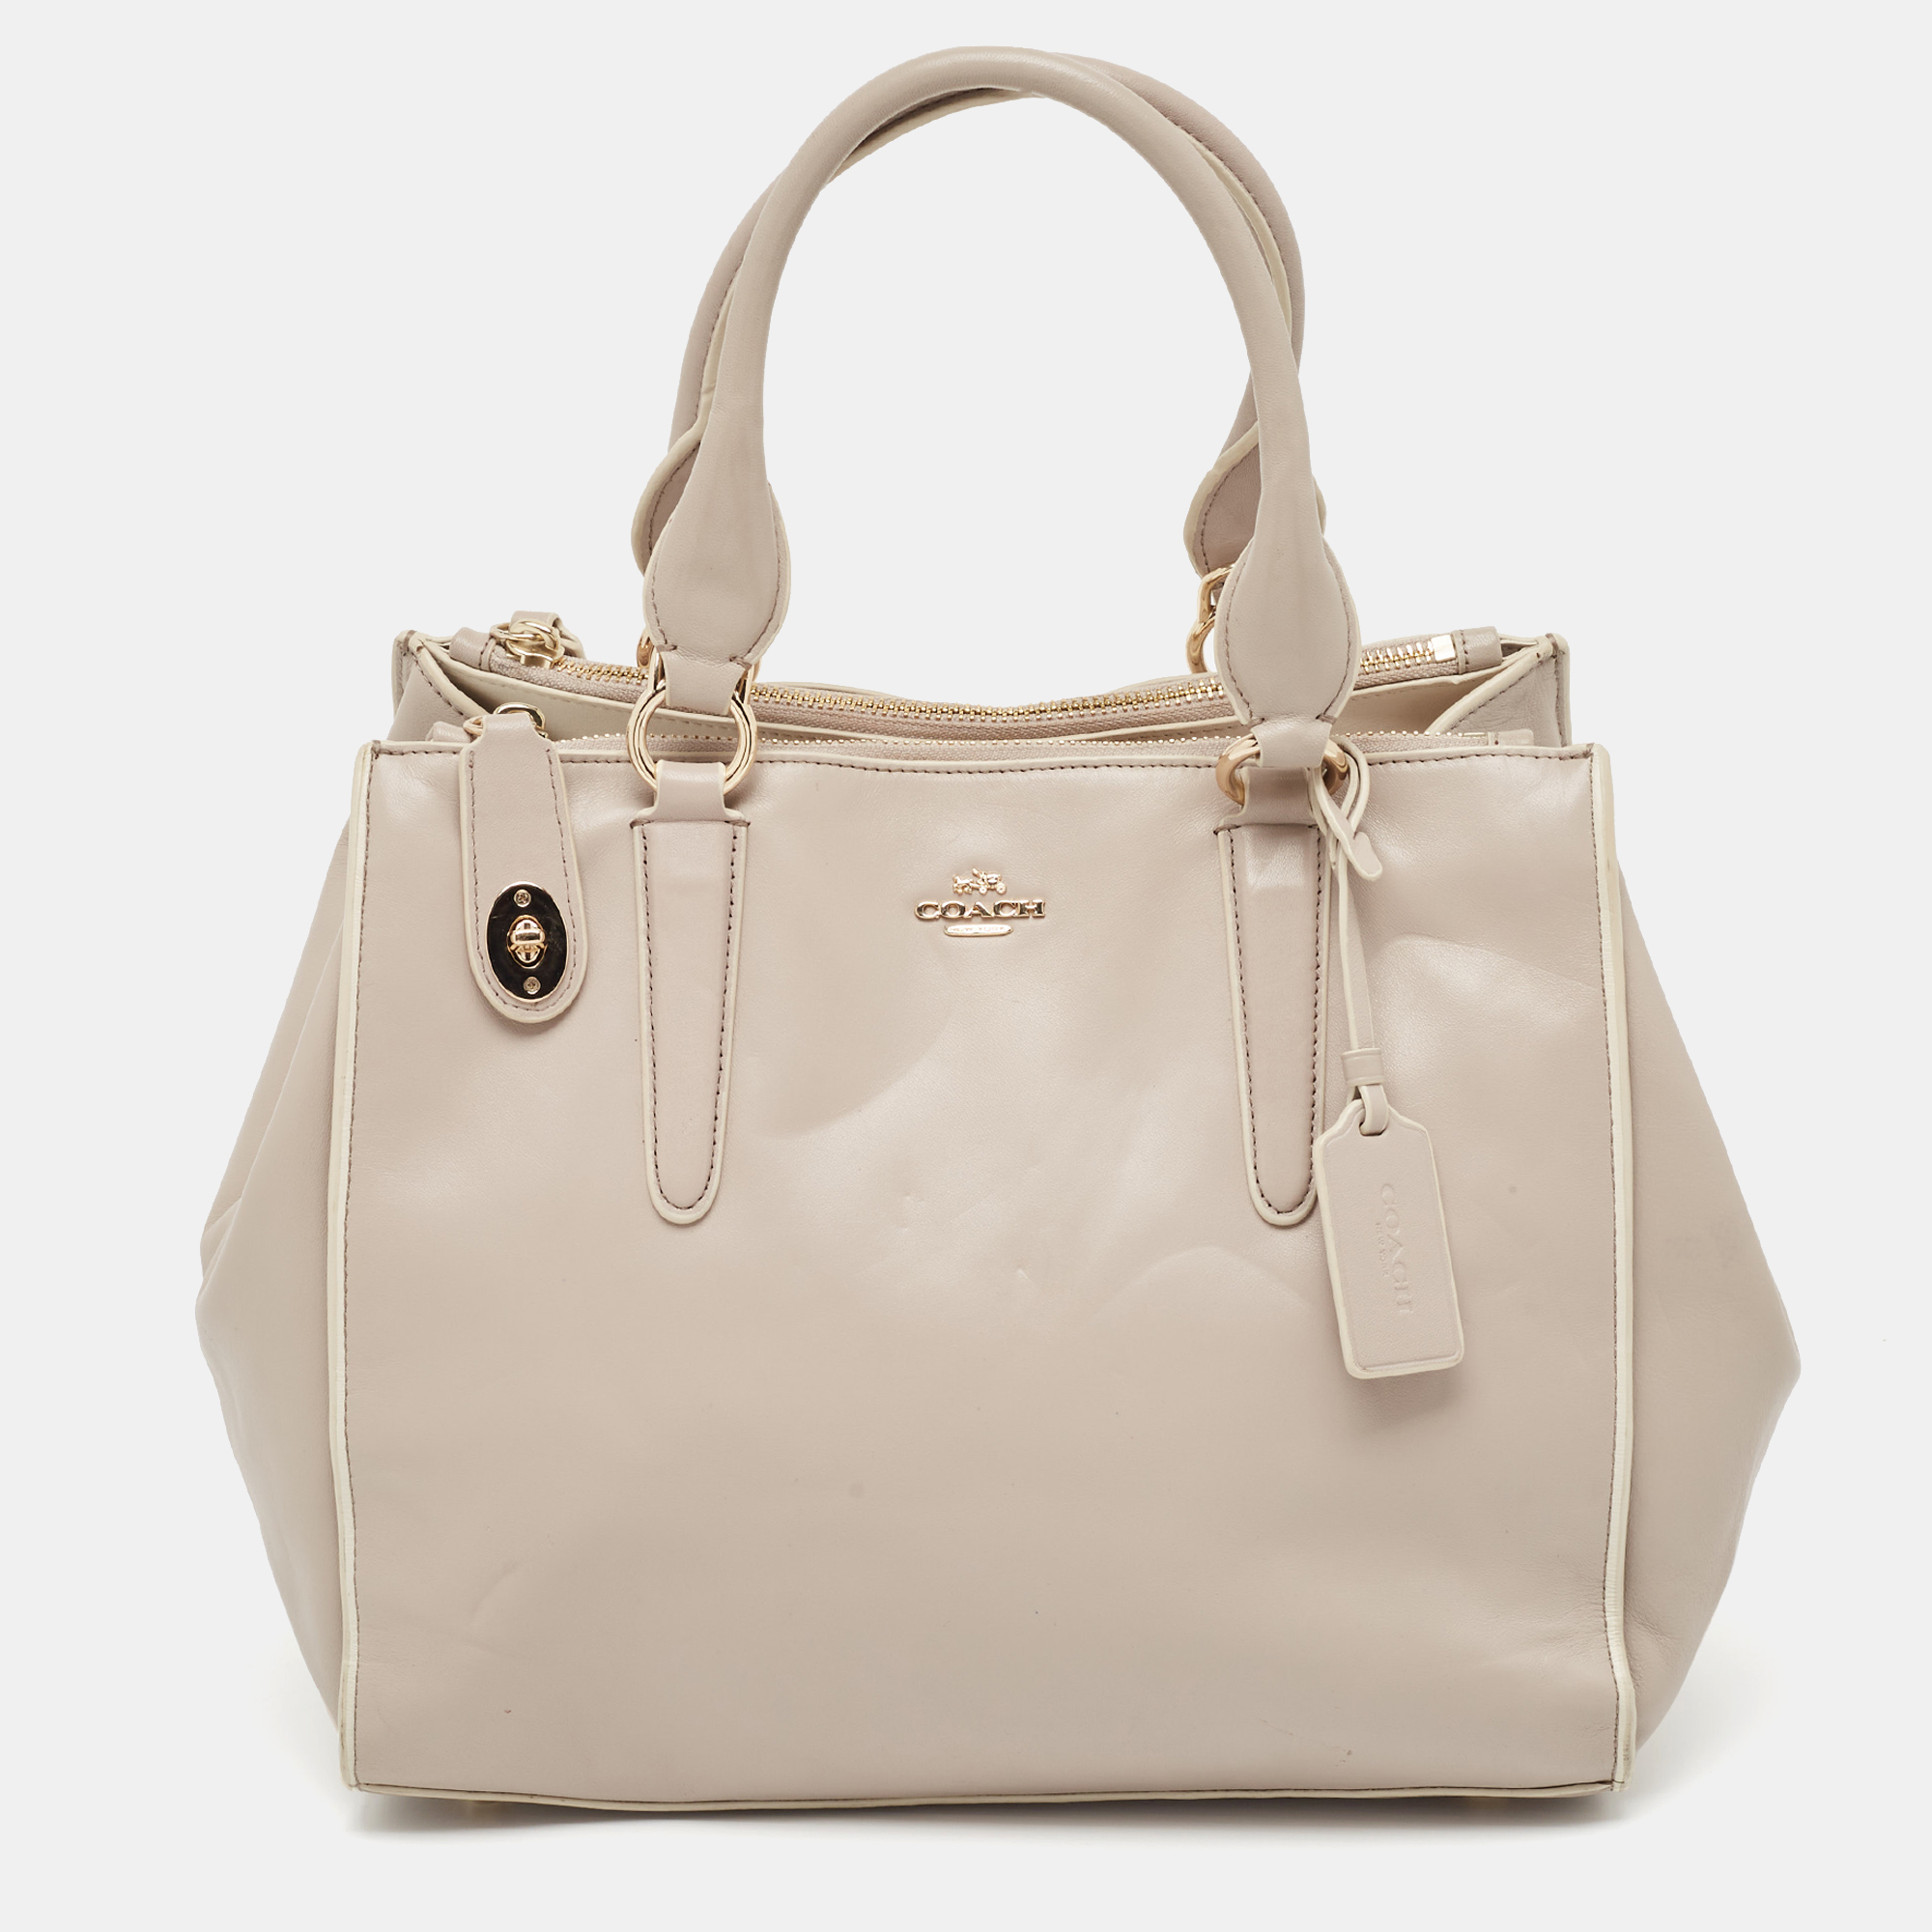 Striking a beautiful balance between essentiality and opulence this tote from the House of Coach ensures that your handbag requirements are taken care of. It is equipped with practical features for all day ease.